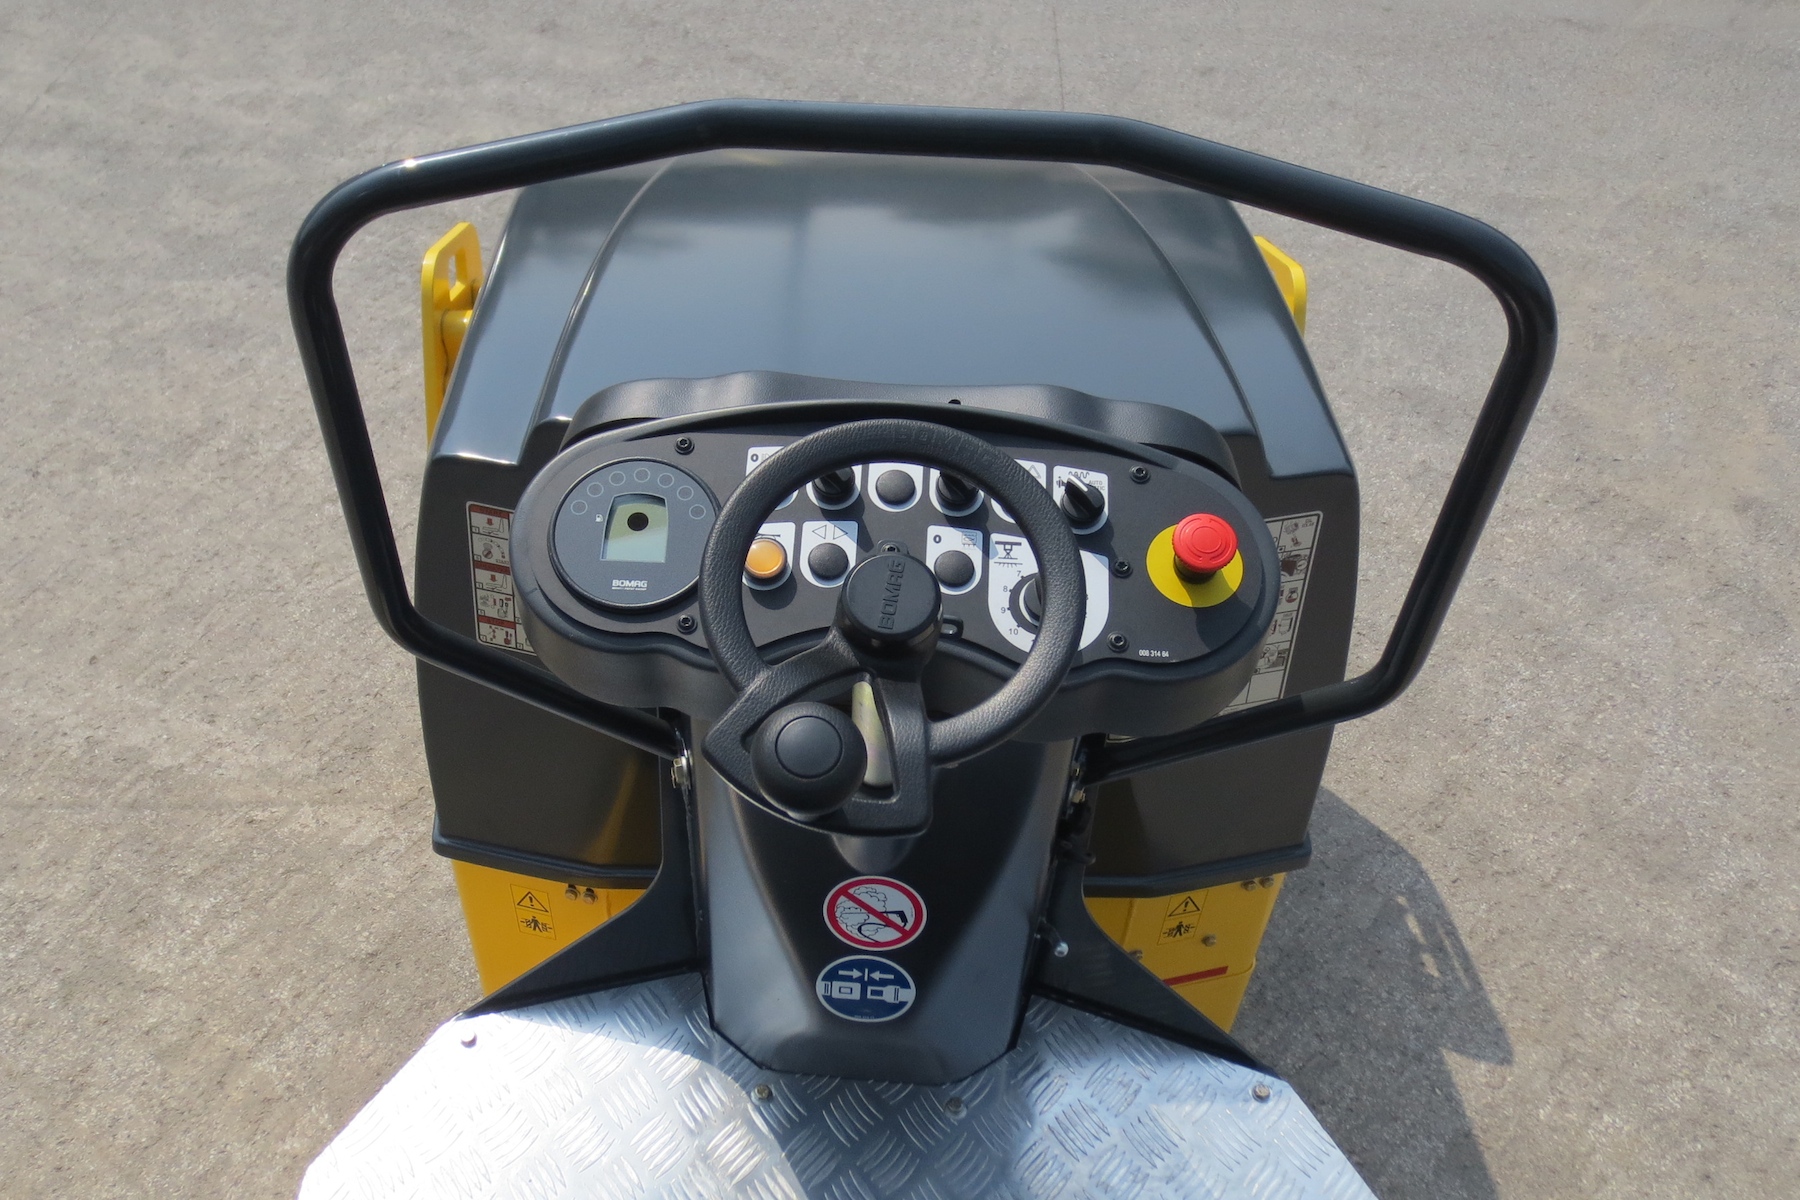 The BOMAG BW100AD-4 features a new Smart Drive steering wheel.